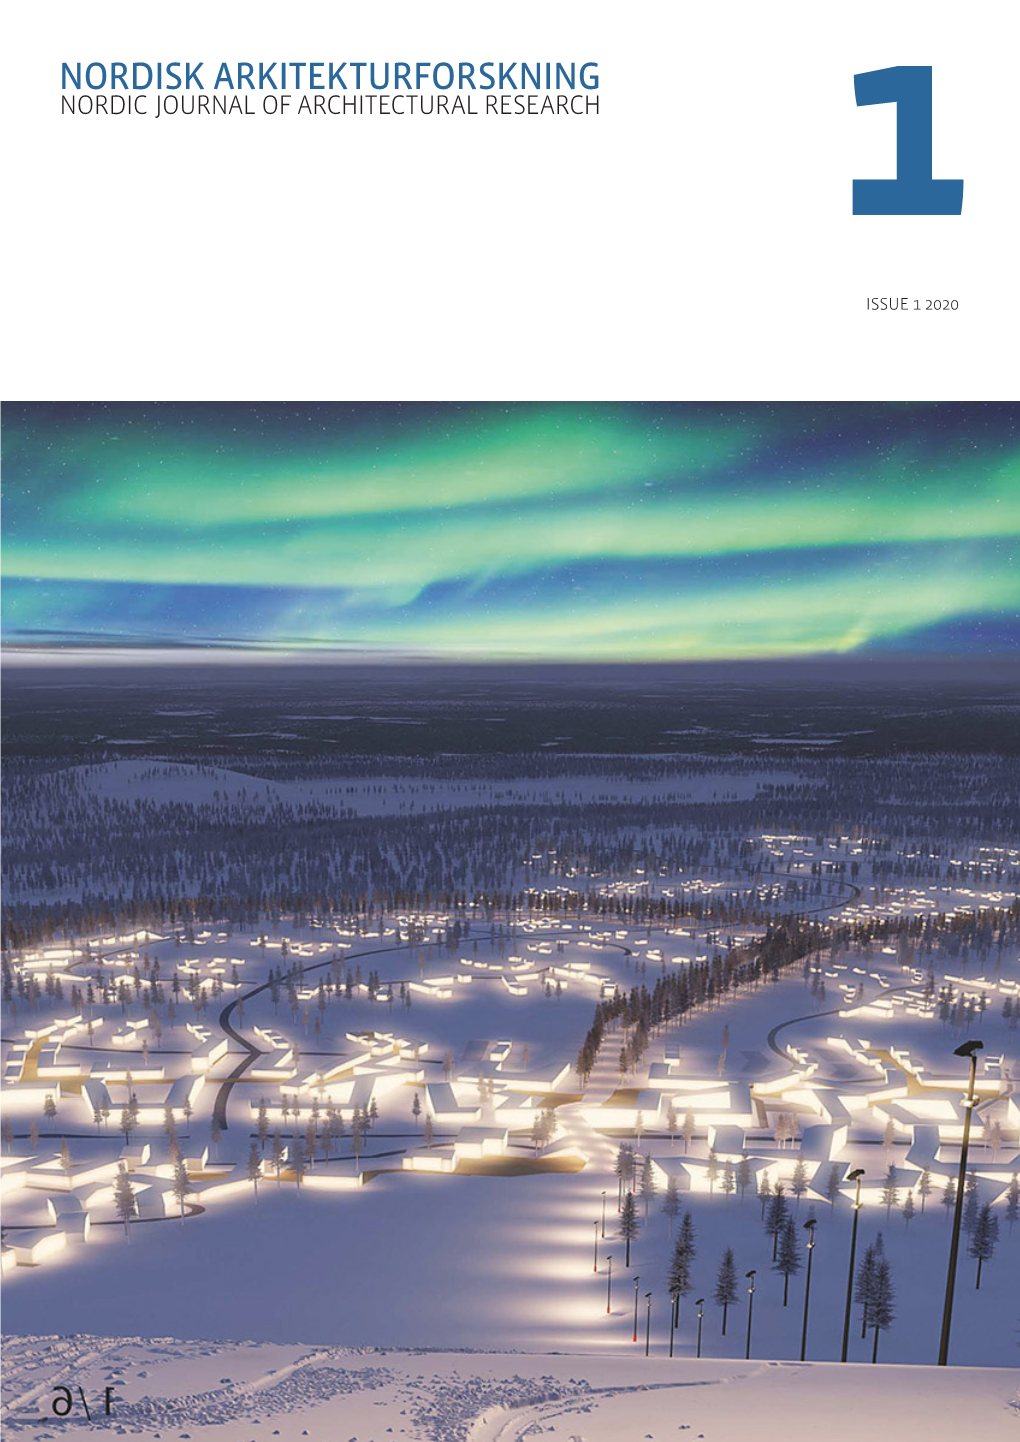 ISSUE 1 2020 NORDISK ARKITEKTURFORSKNING Nordic Journal of Architectural Research